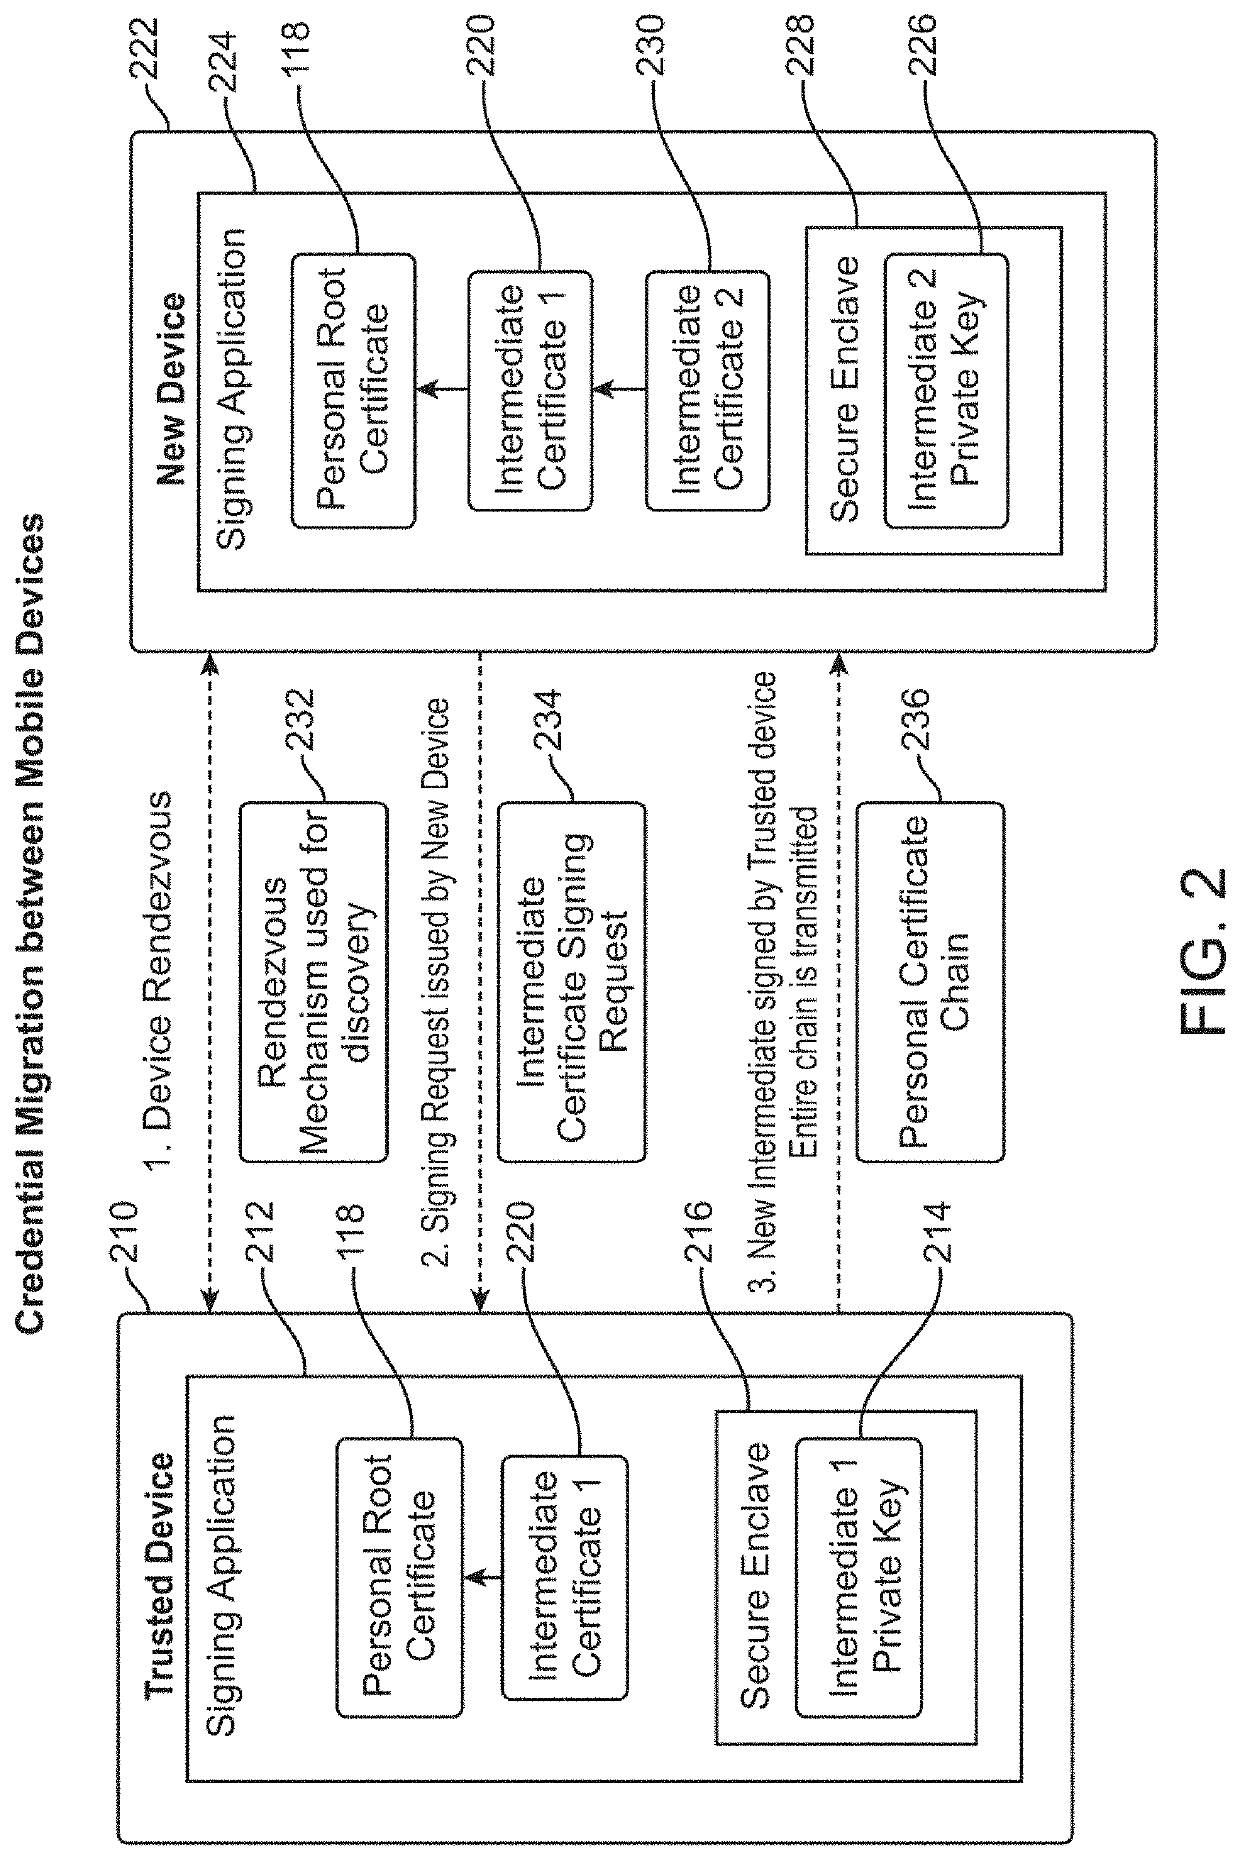 User authentication with self-signed certificate and identity verification and migration